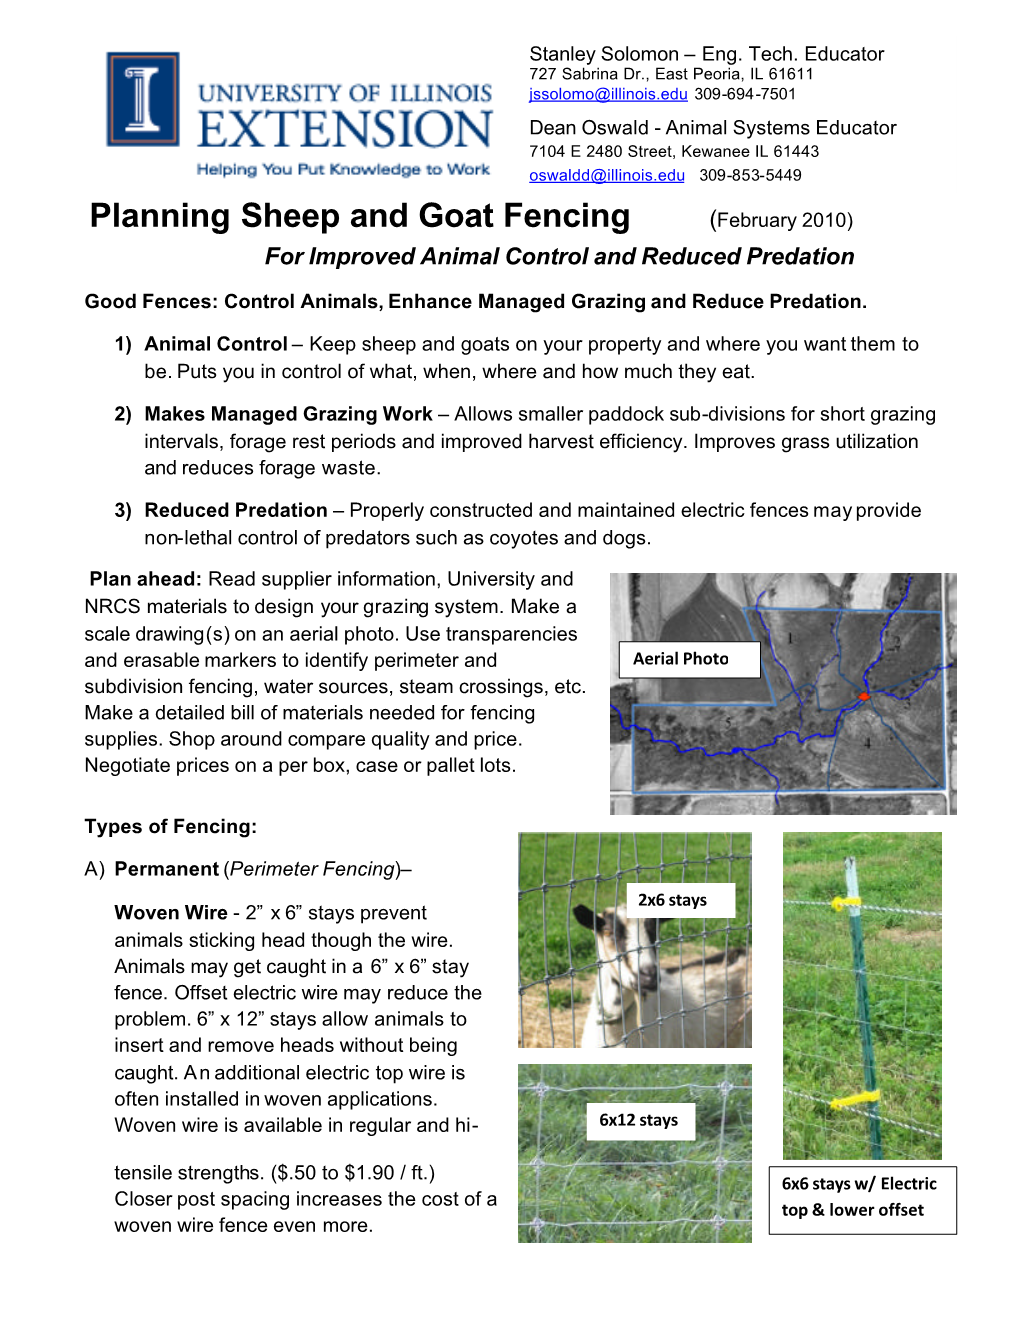 Planning Sheep and Goat Fencing (February 2010) for Improved Animal Control and Reduced Predation